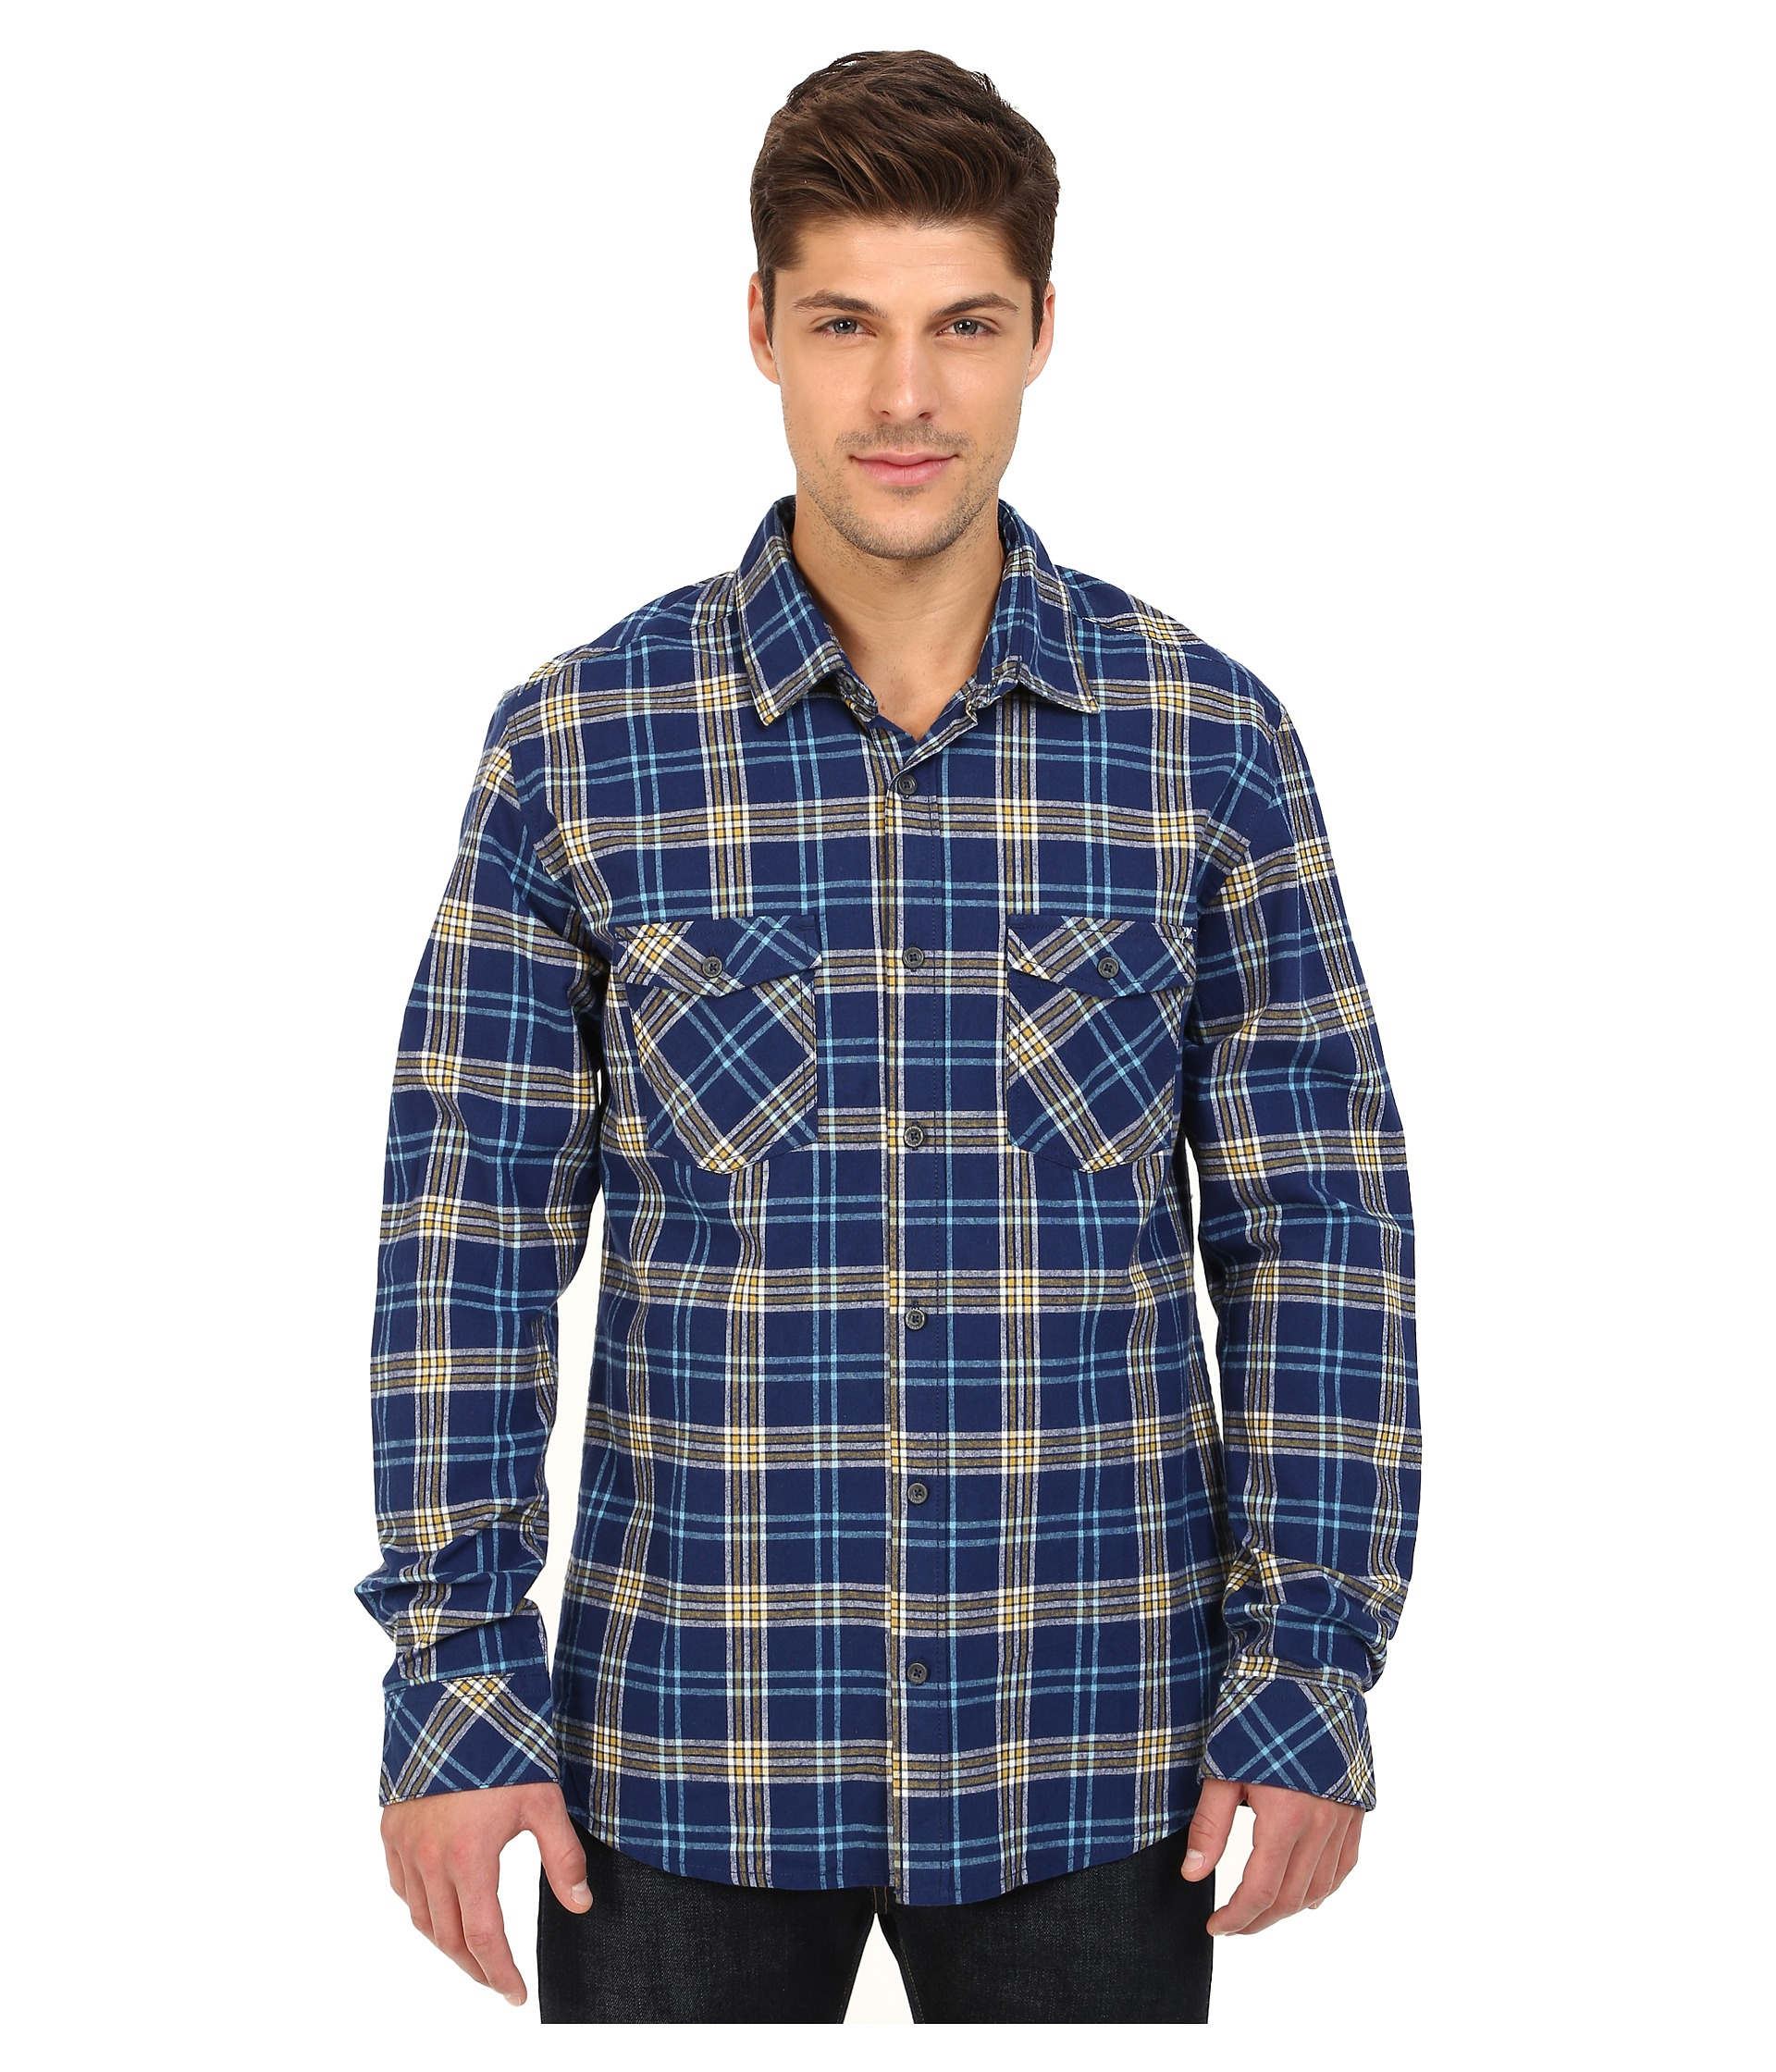 Lyst - Quiksilver Everyday Flannel Long Sleeve in Blue for Men